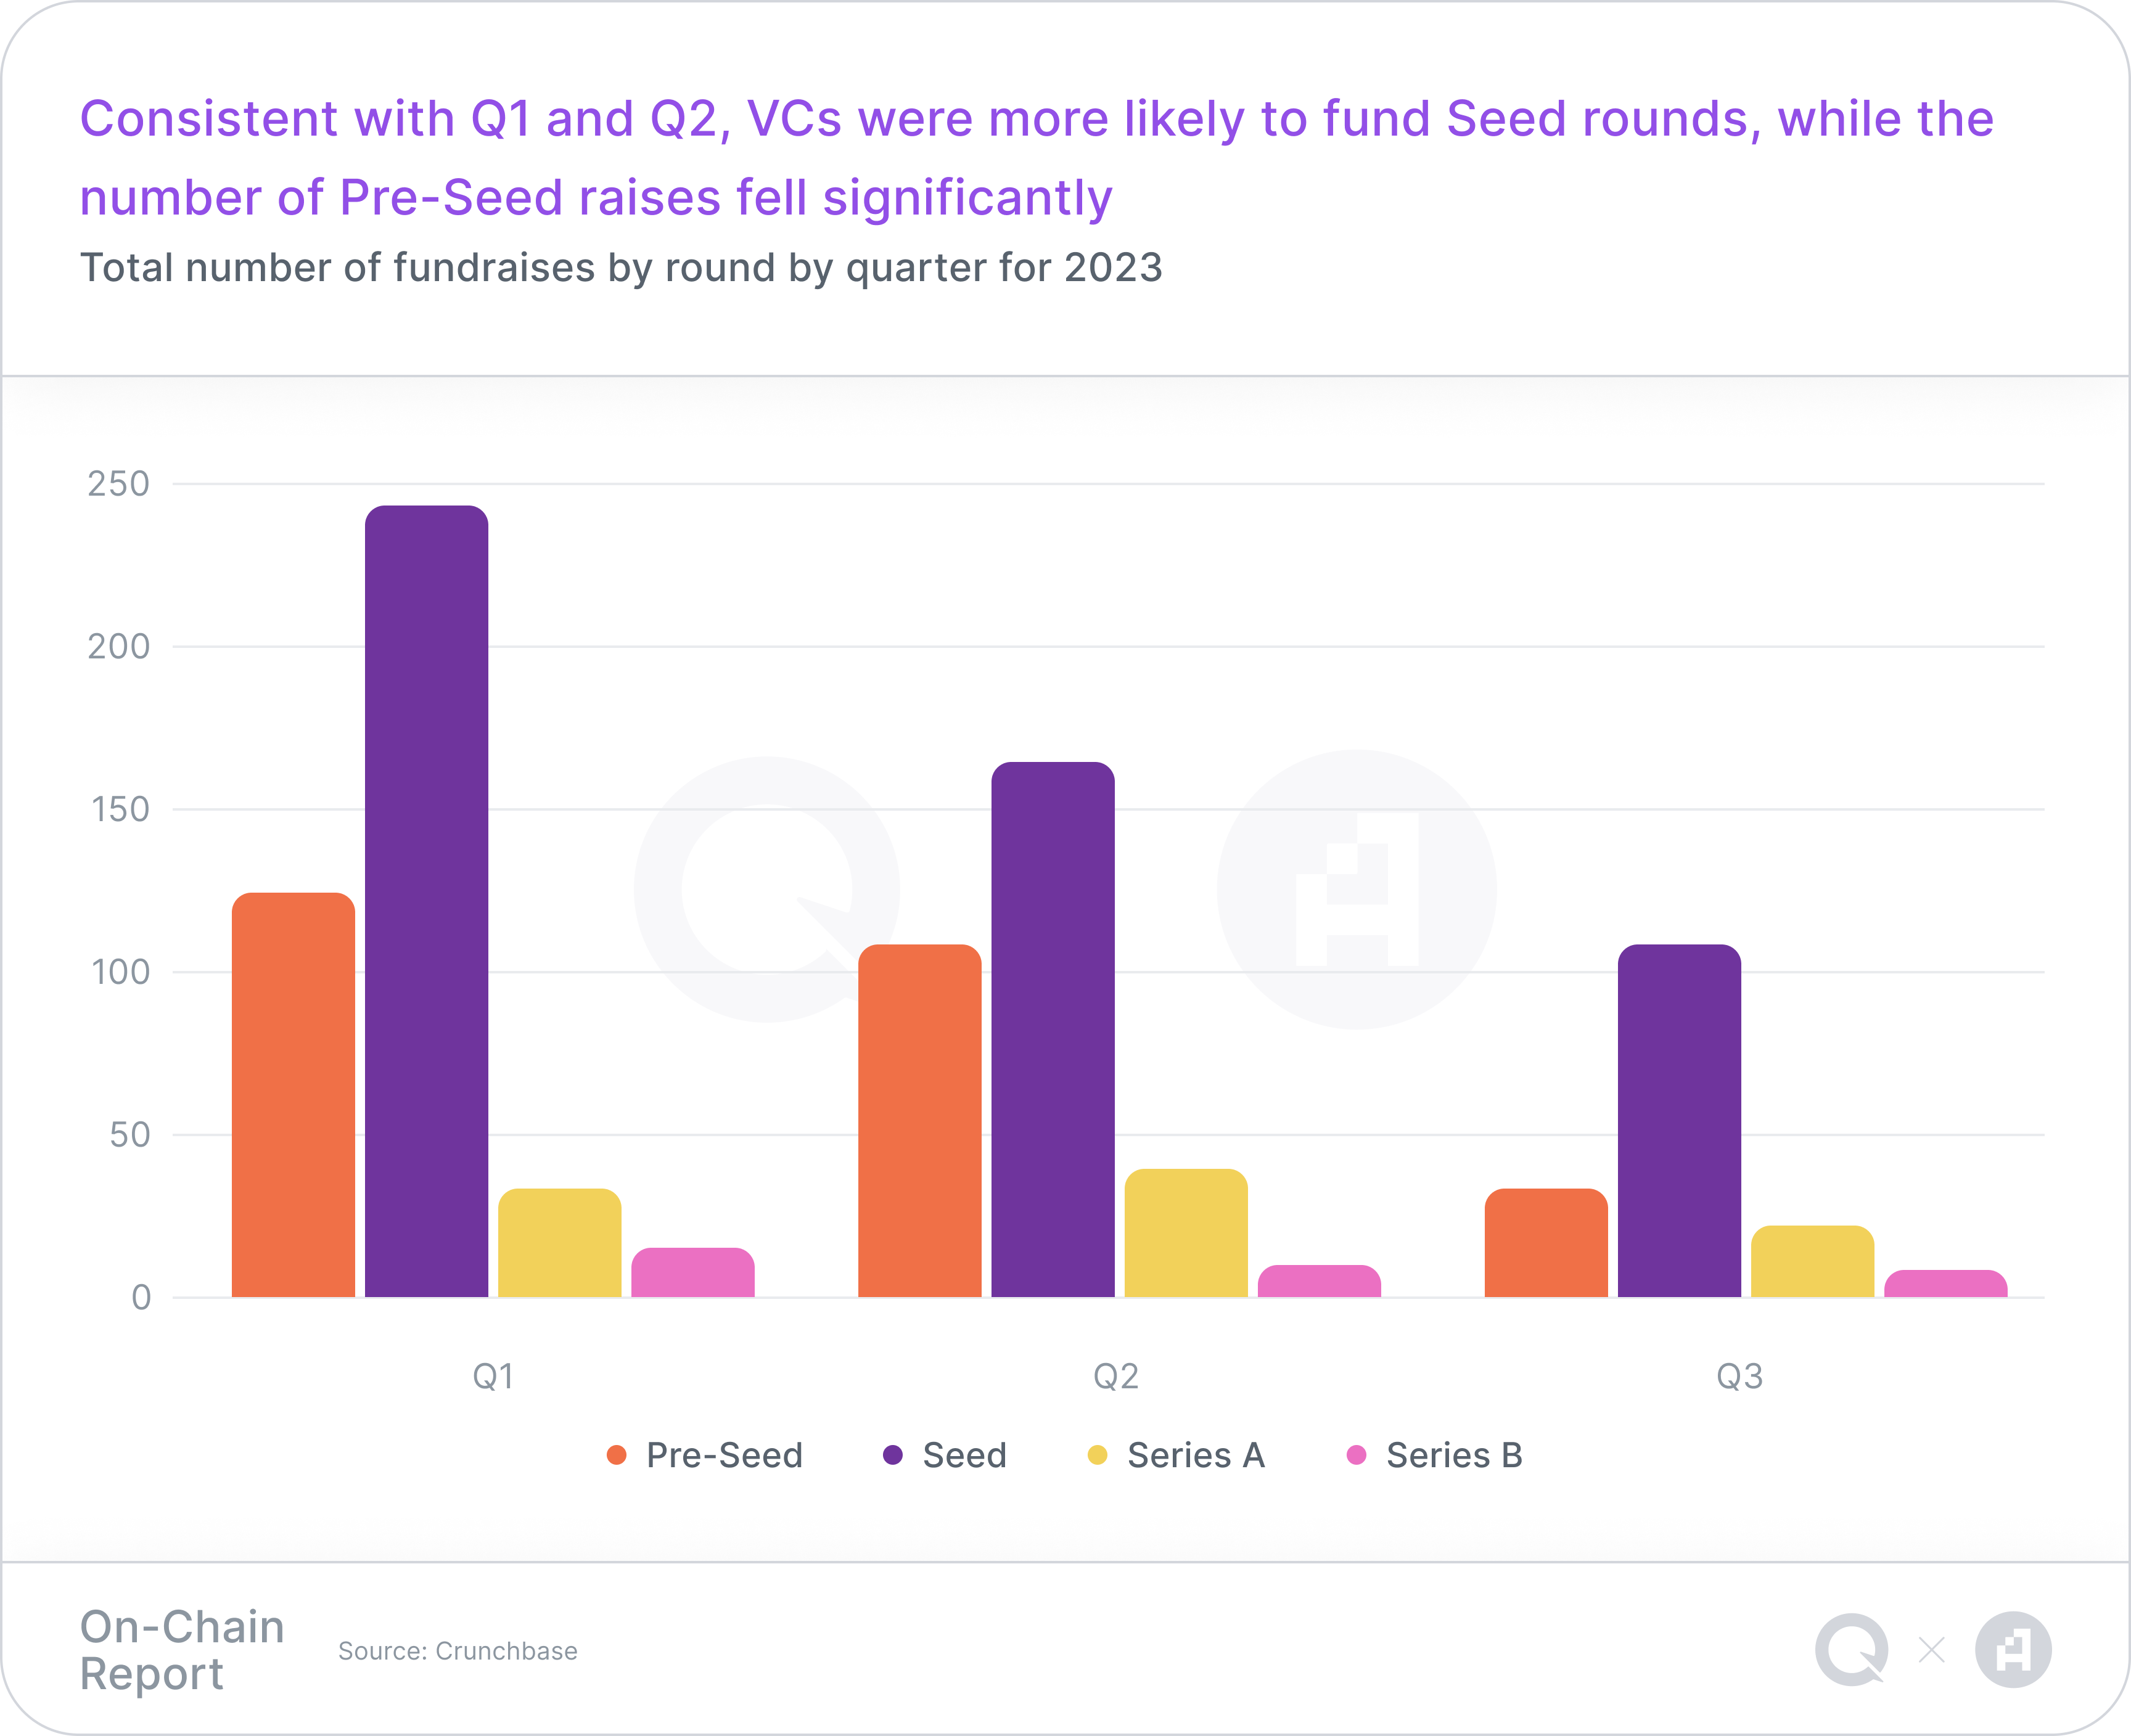 A chart representing Total number of fundraises by round by quarter for 2023, with a takeaway headline of "Consistent with Q1 and Q2, VCs were more likely to fund Seed rounds, while the number of Pre-Seed raises fell significantly"